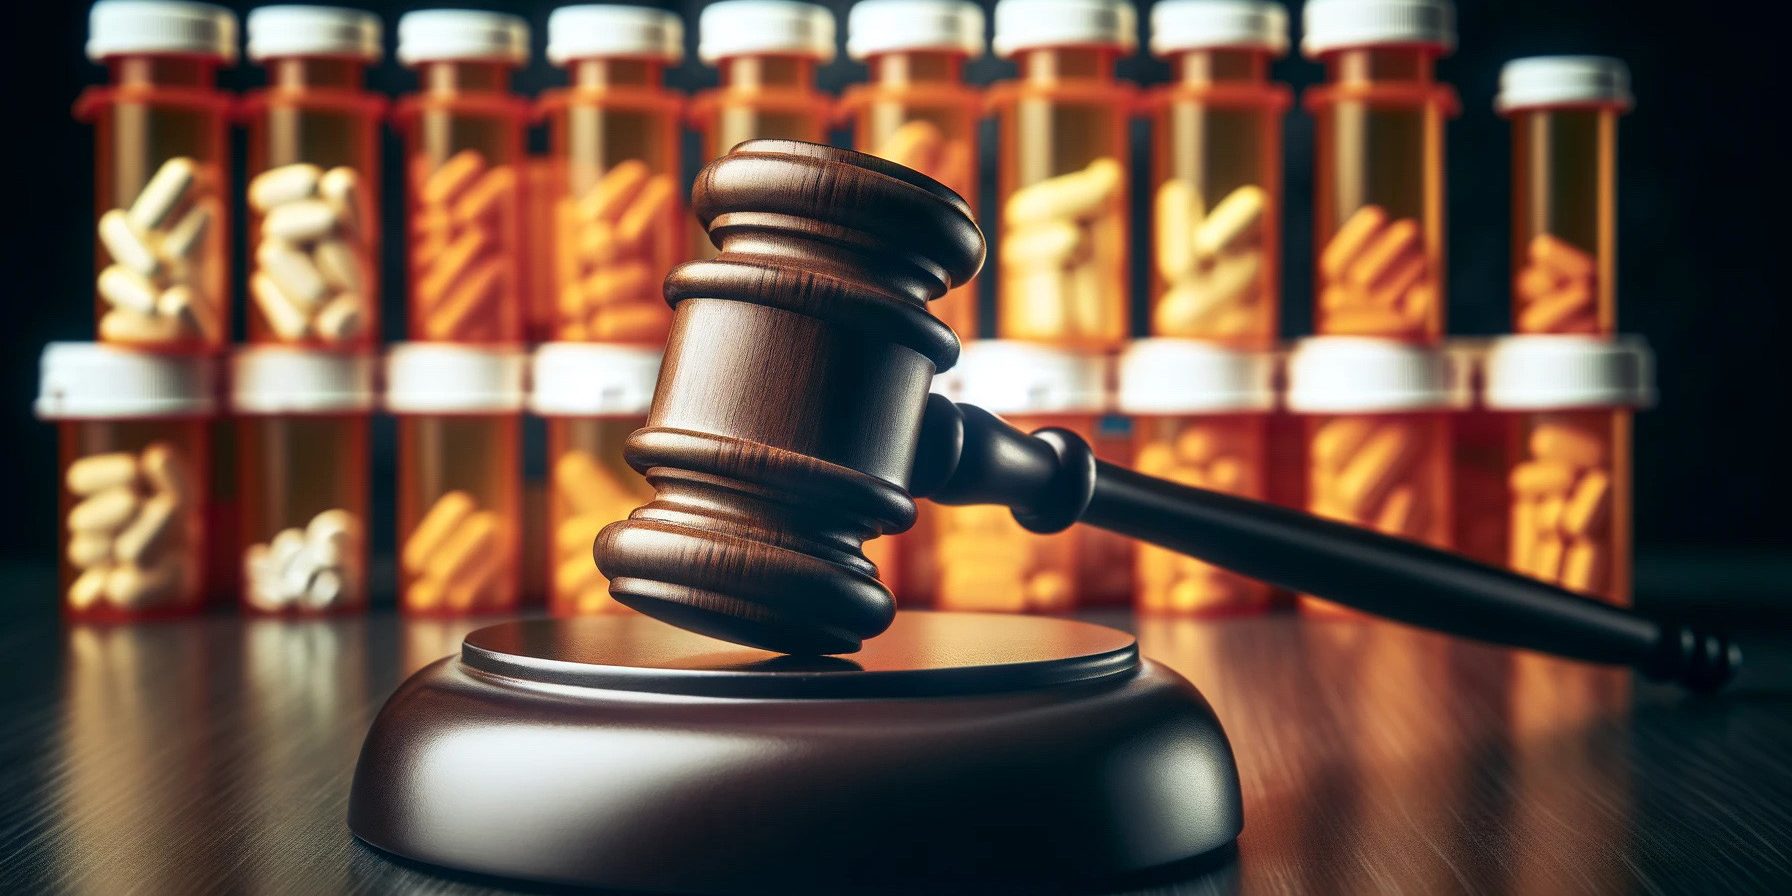 J&J Sued Over Contracting with PBM that Overcharged Health Plan, Enrollees